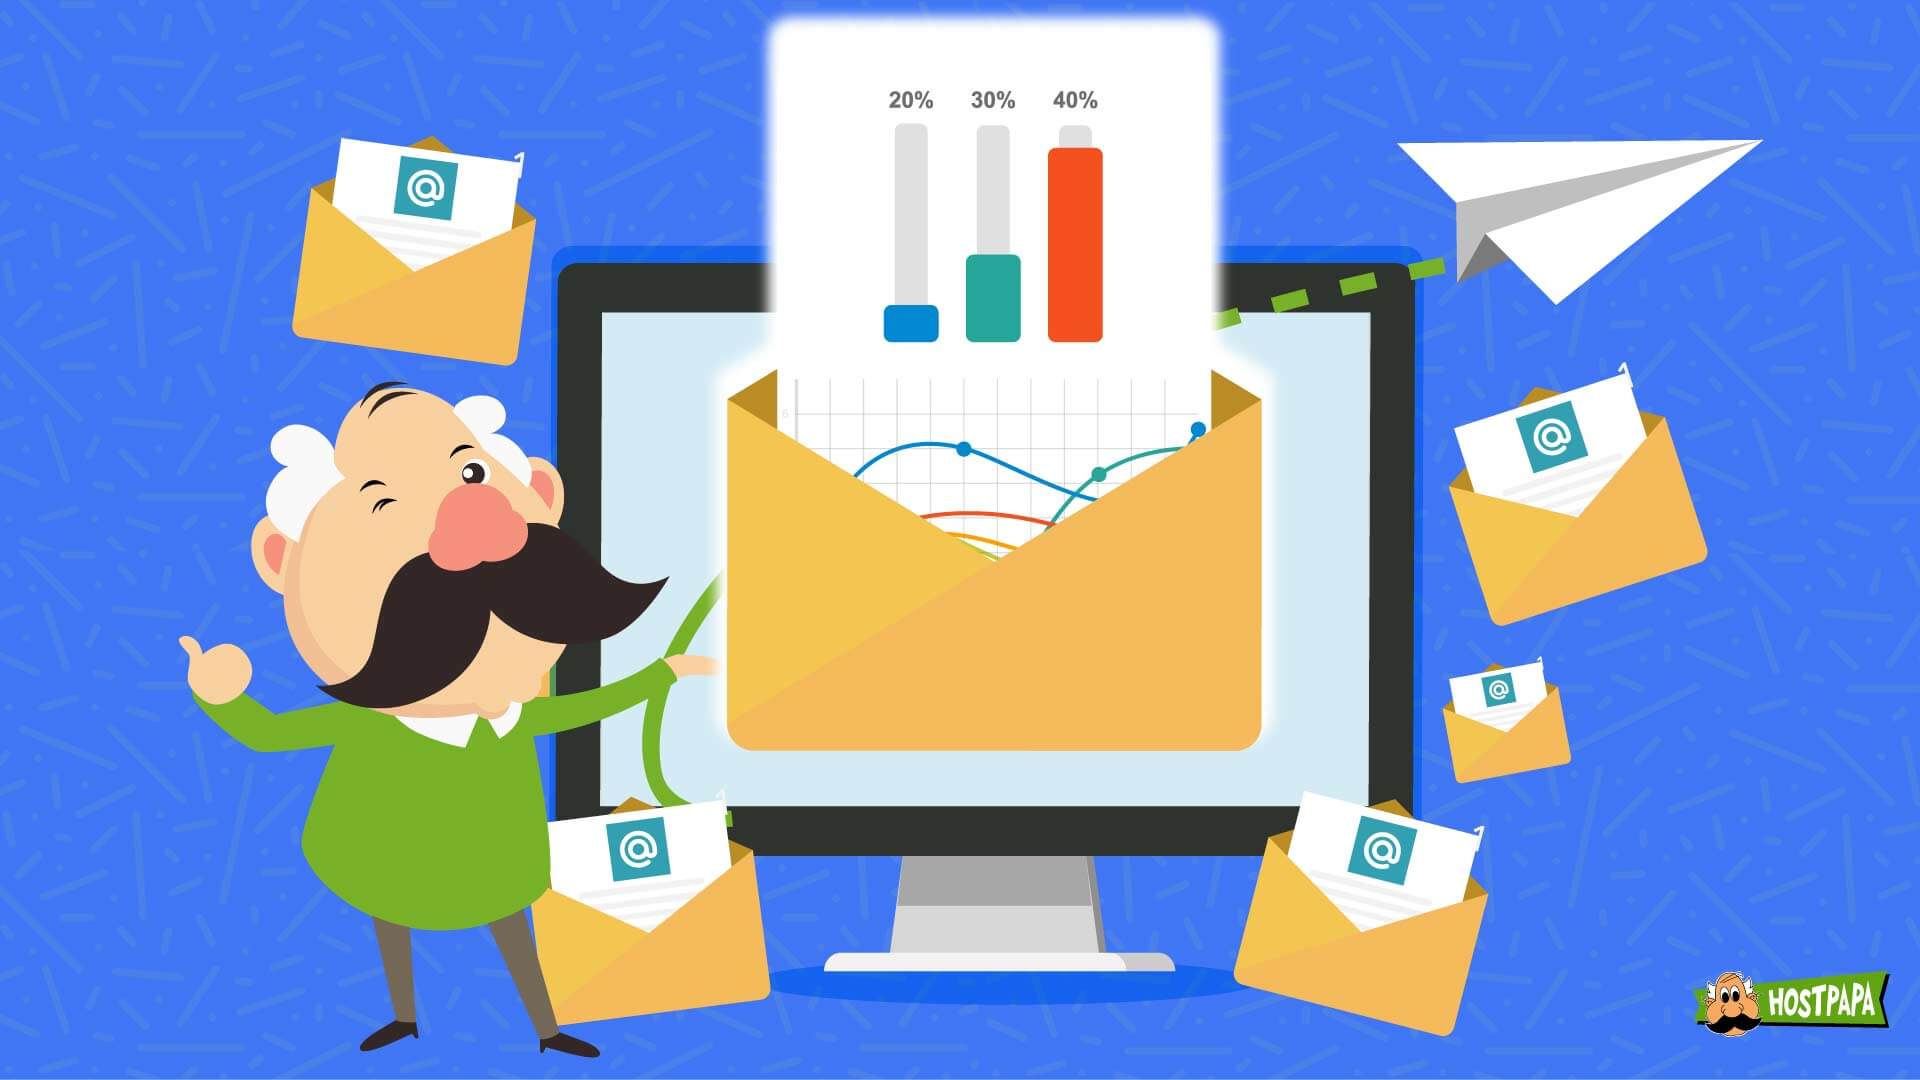 Email Marketing Stats for 2020